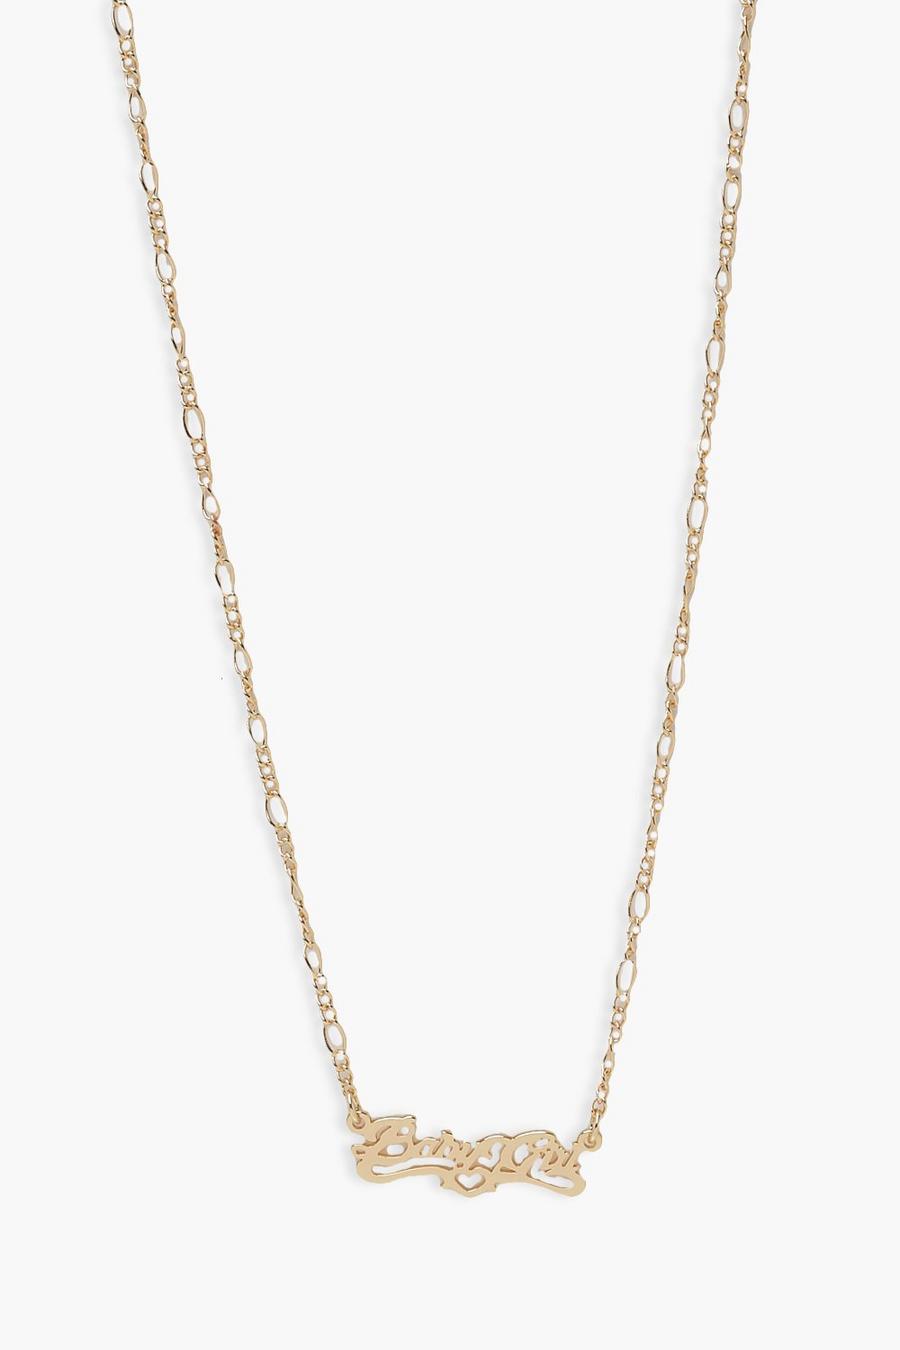 Gold metallic Baby Girl Chain Necklace 